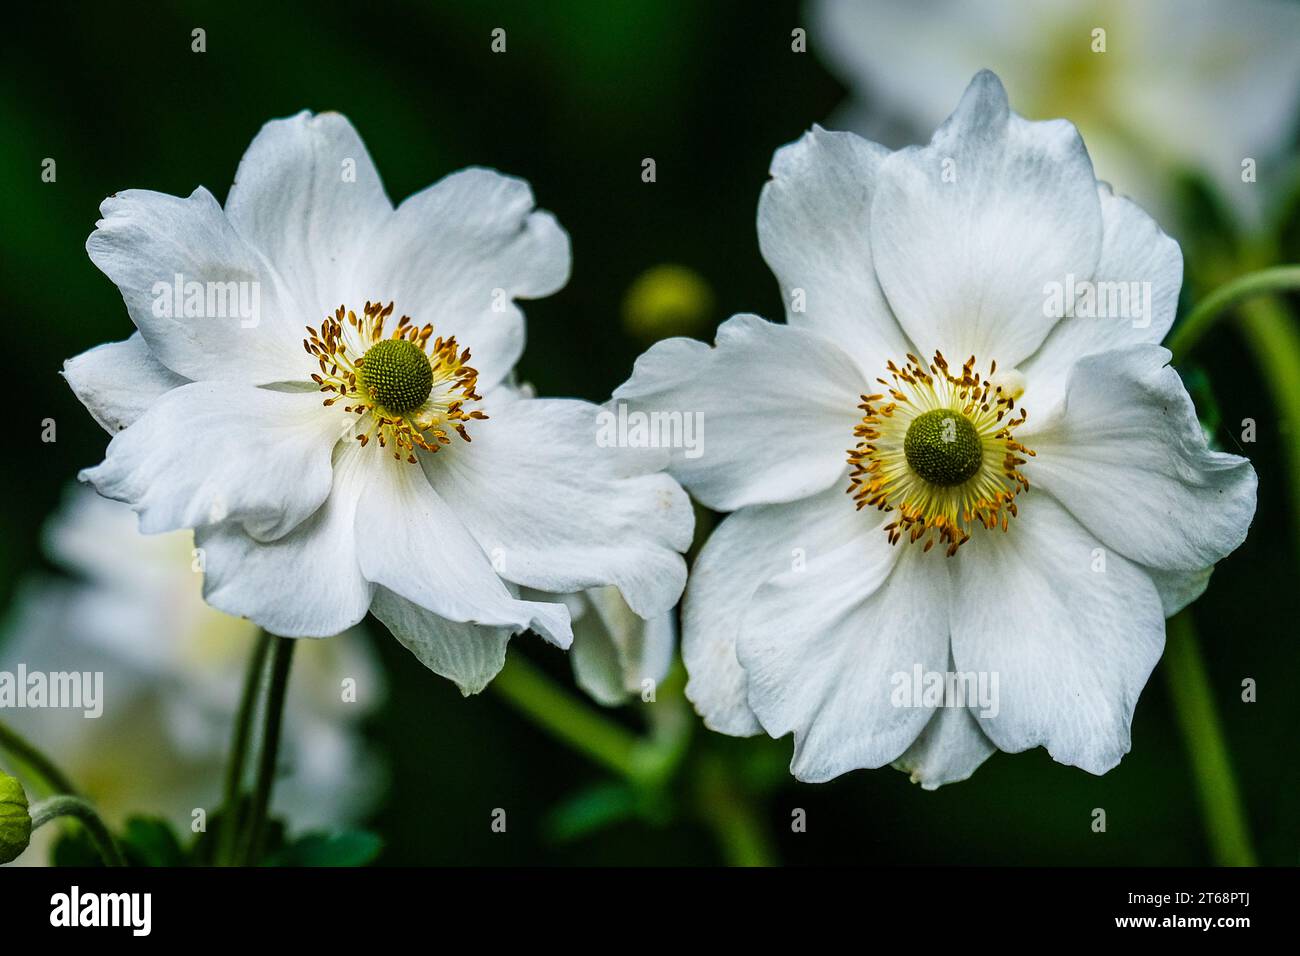 A close up of Japanese Anemone Eriocapitela hupehensis growing in a garden in the UK. Stock Photo